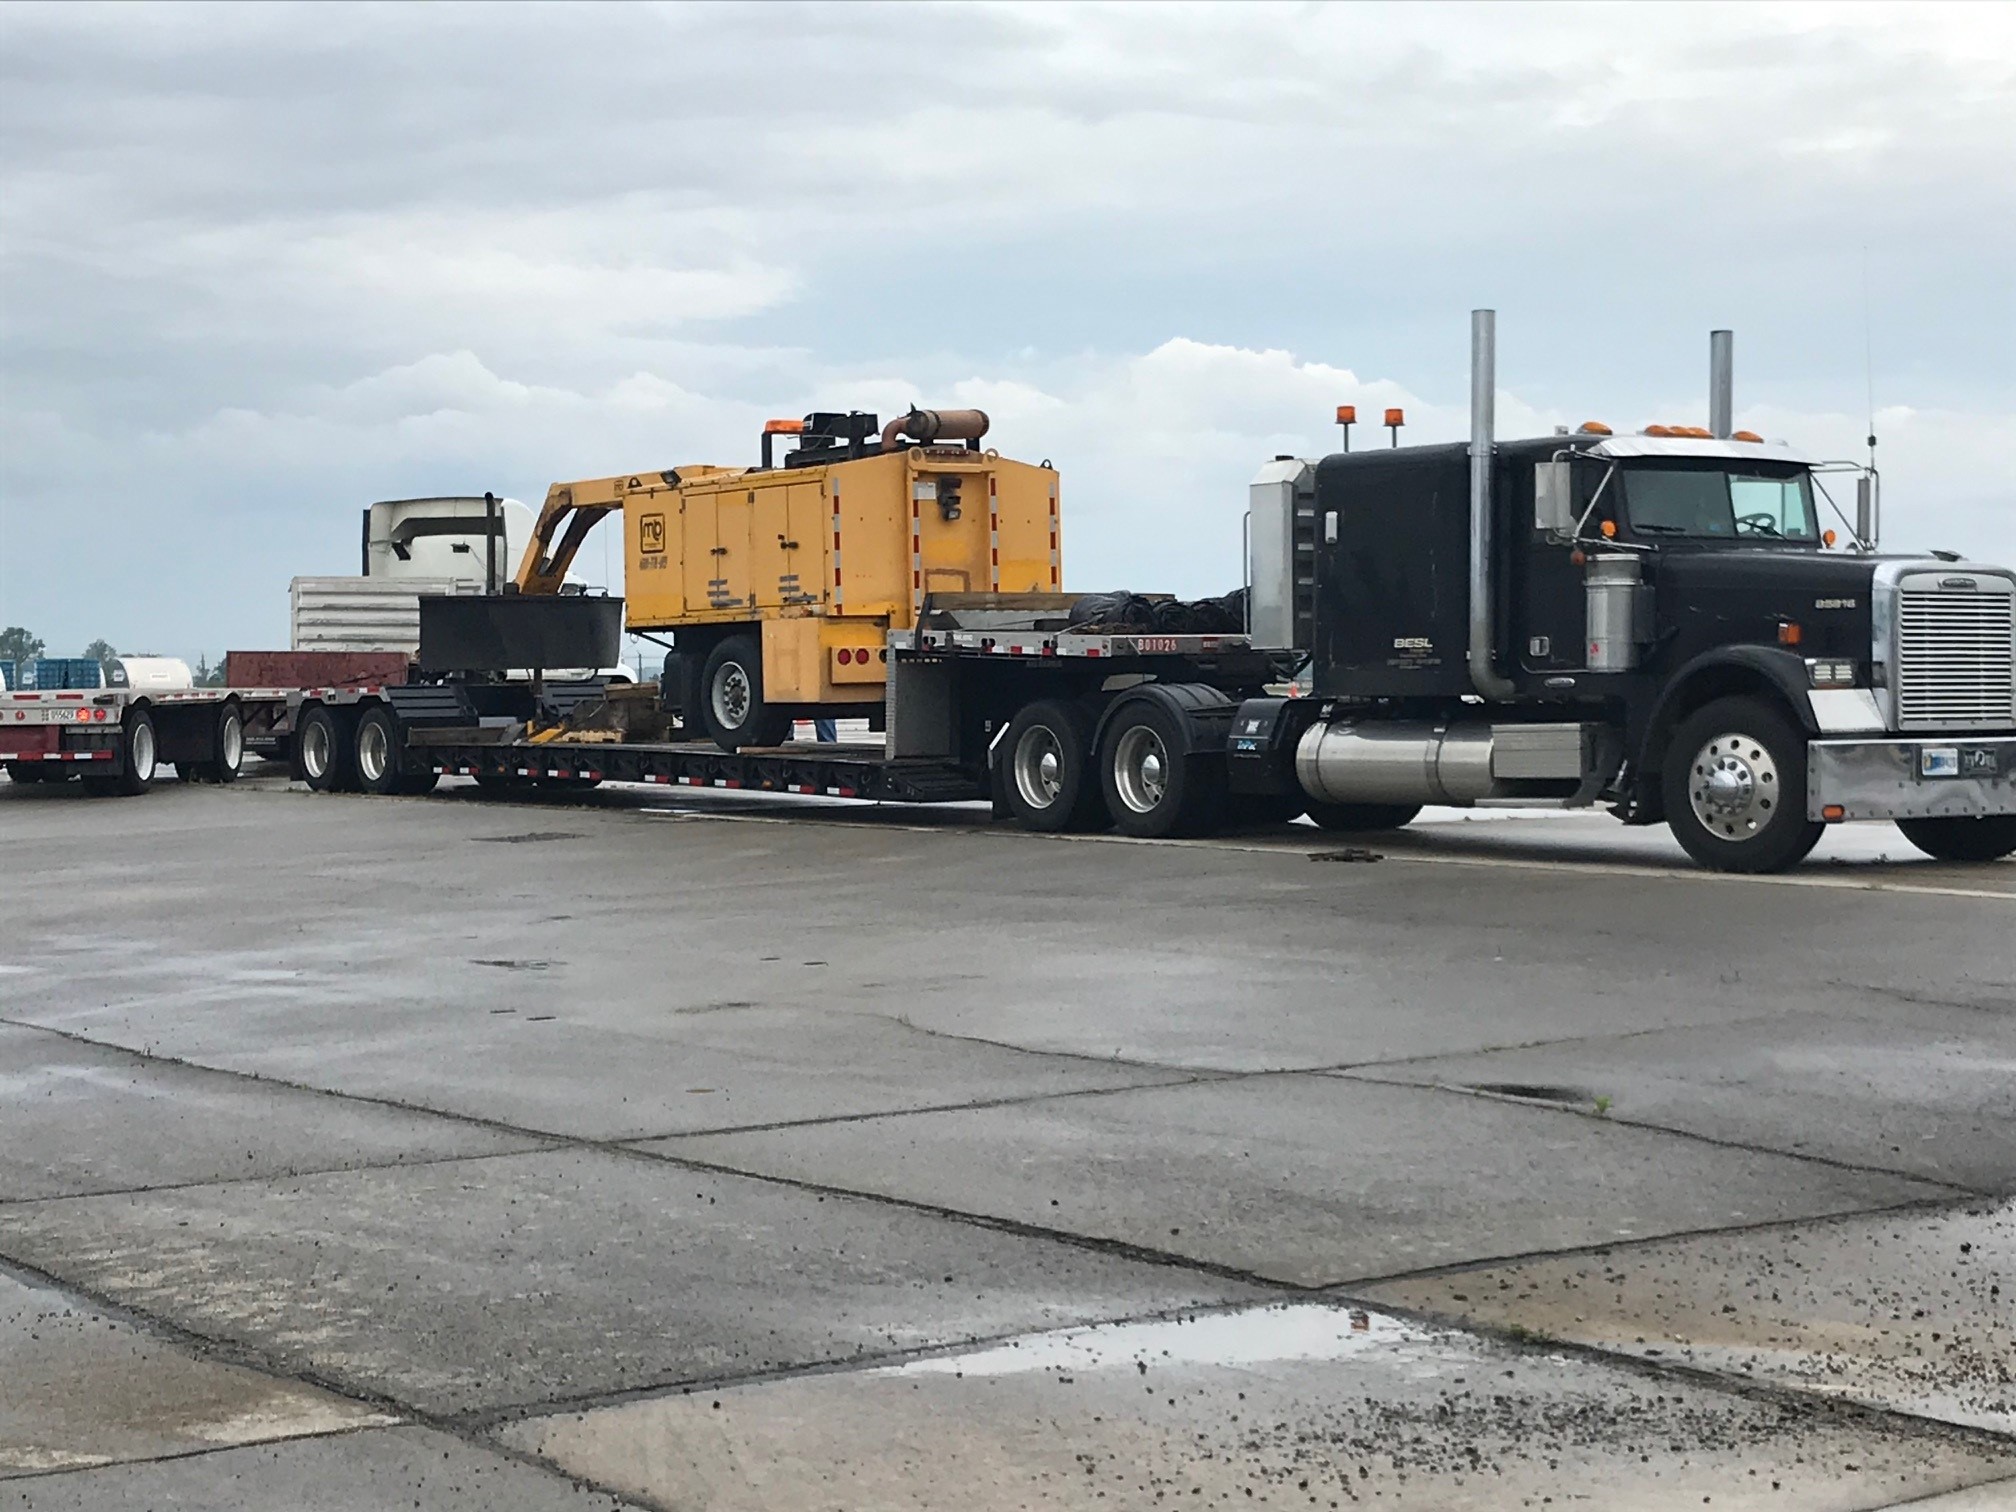 Delivery of airport operations equipment recently acquired at auction from an airport in northern Ohio.